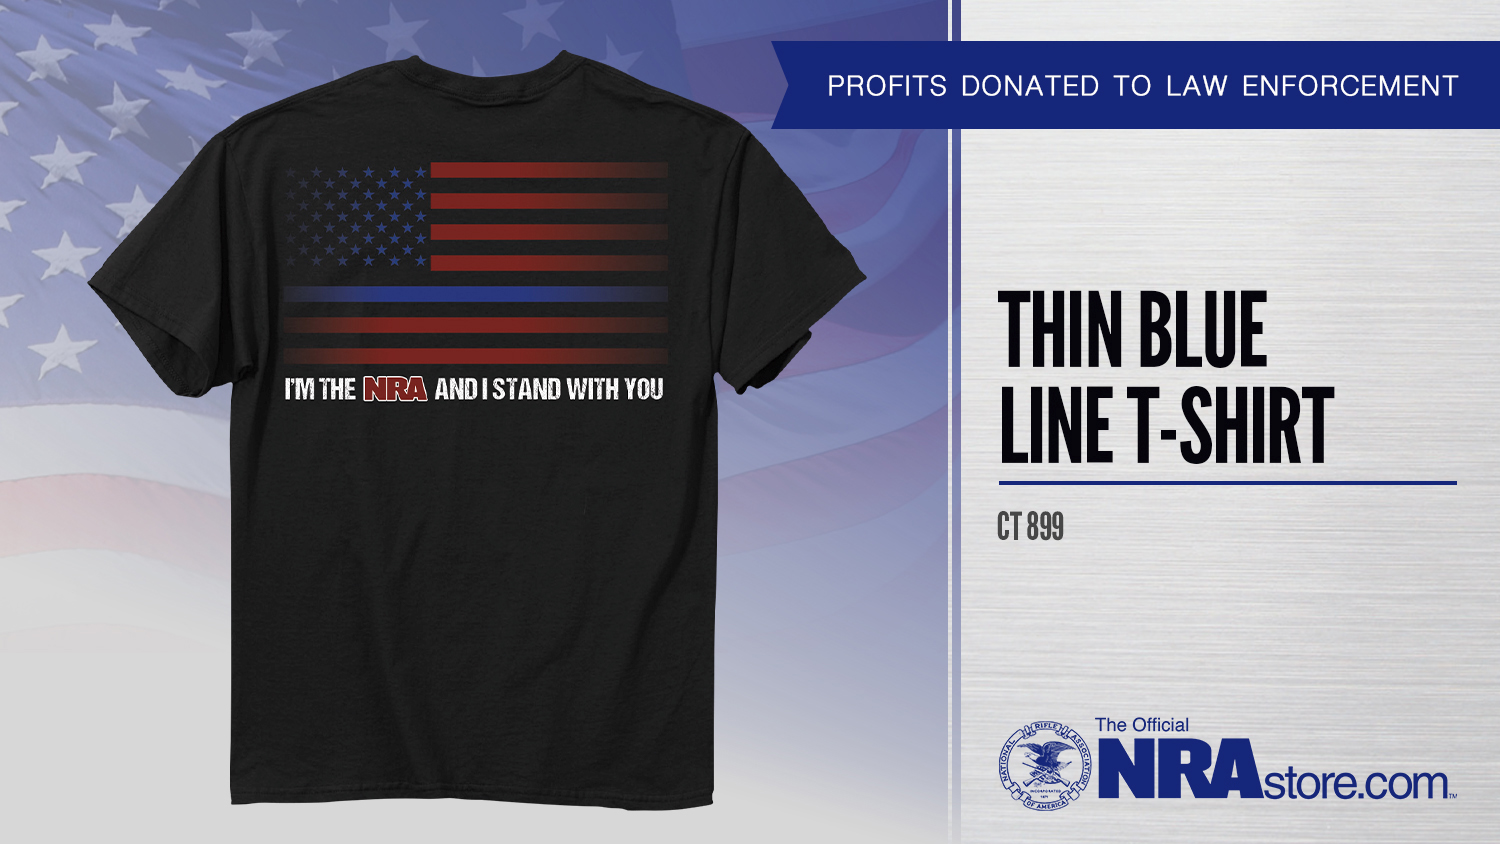 NRA Store Product Highlight: Thin Blue Line T-Shirt